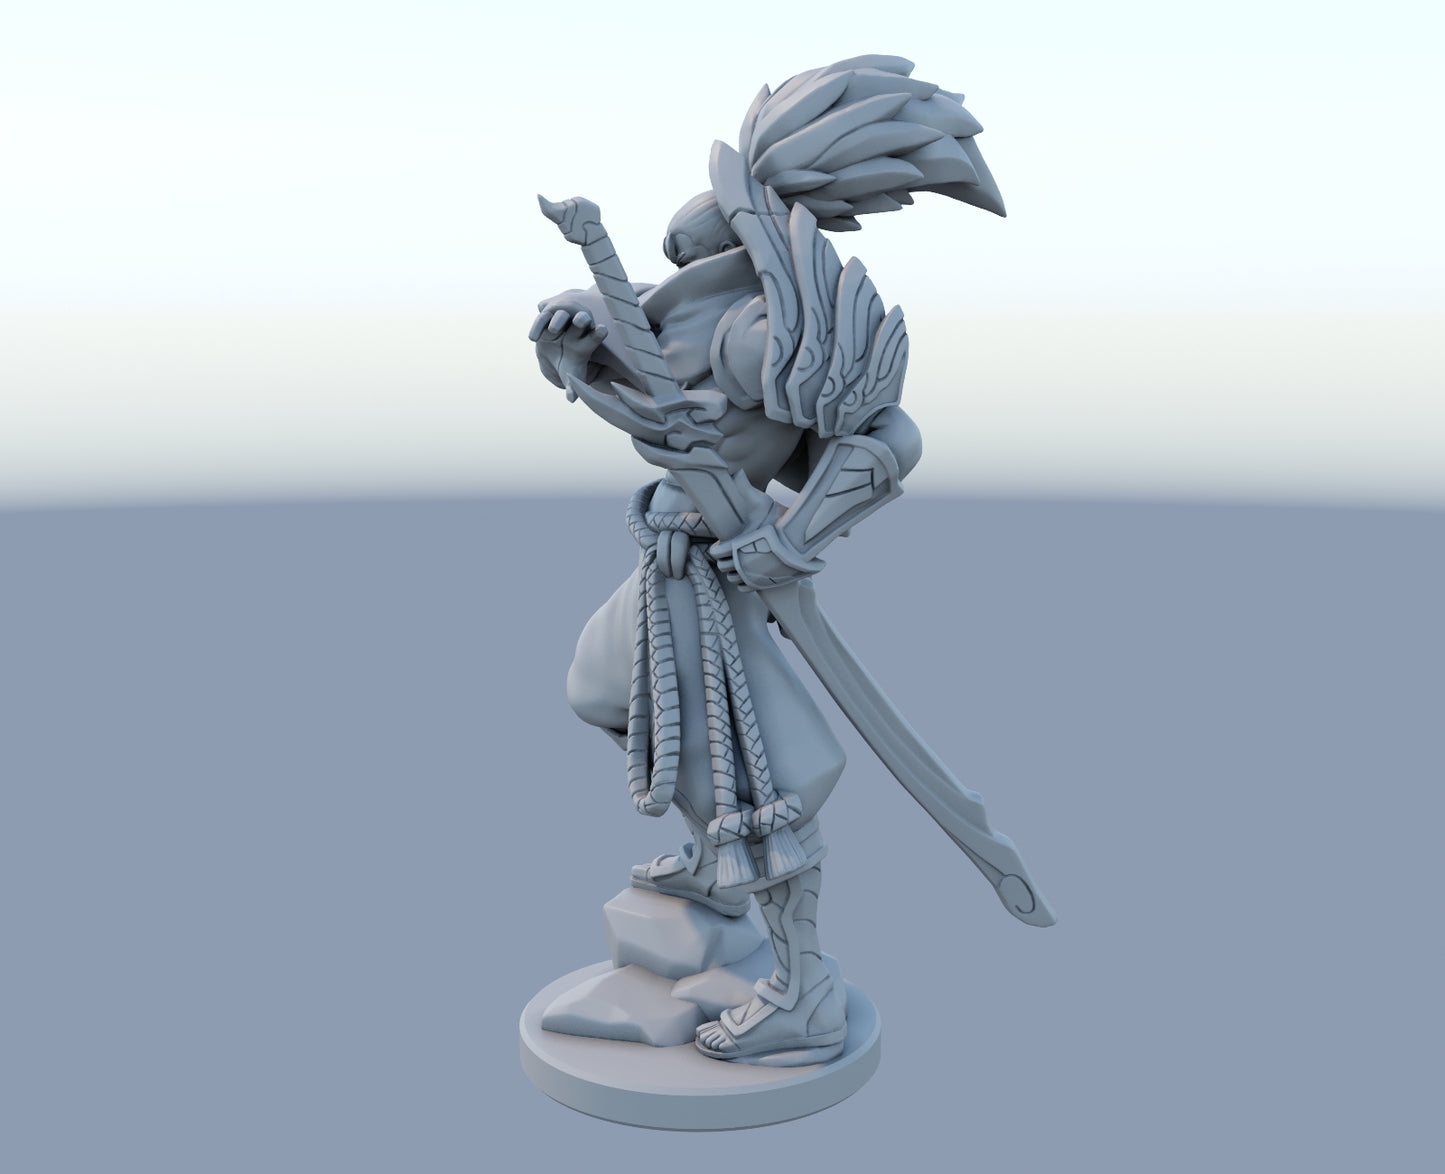 Yasuo 3D-printed League of Legends champion figure. Decorate your gaming setup or home with your favorite League of Legends champion! Choose between the unpainted version, perfect for you to paint yourself, or the hand-painted version by a professional painter. Order your figure today!